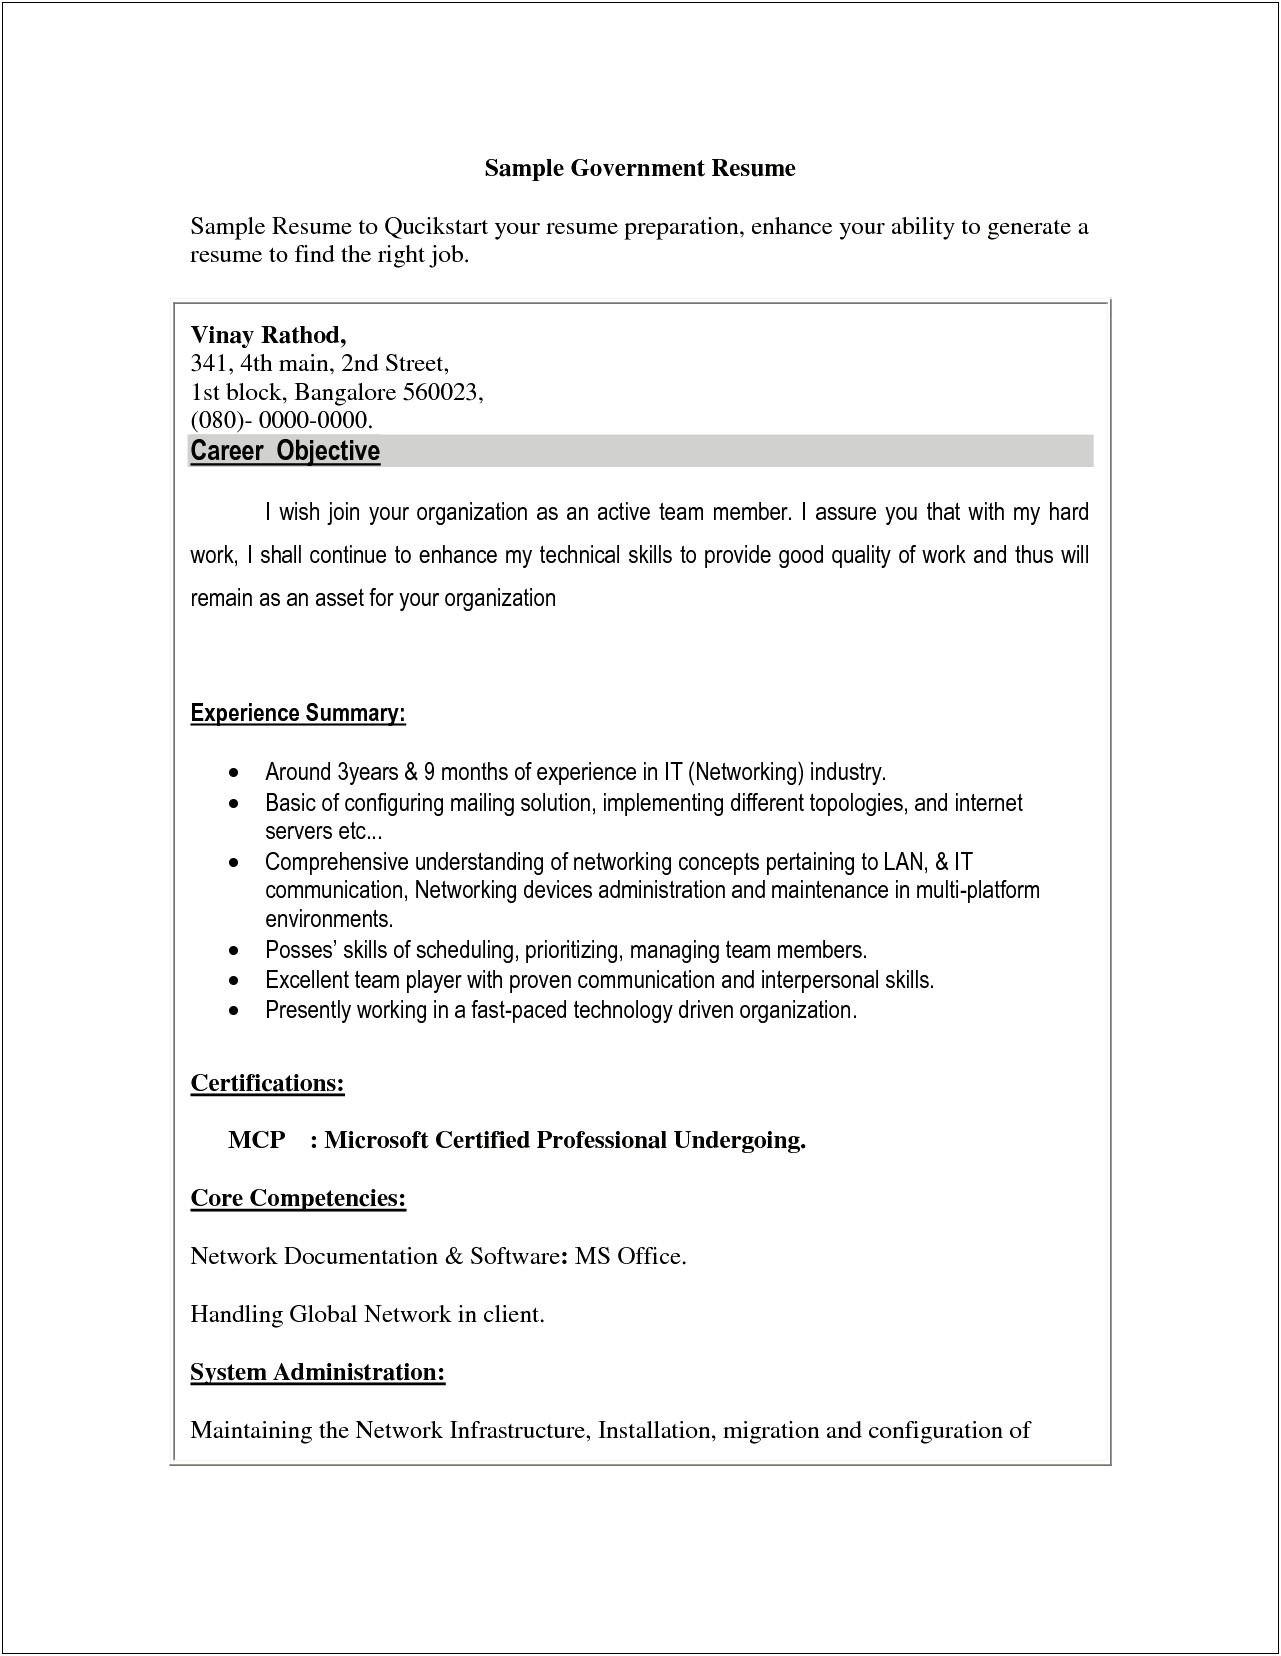 Resume For Public Sector Jobs